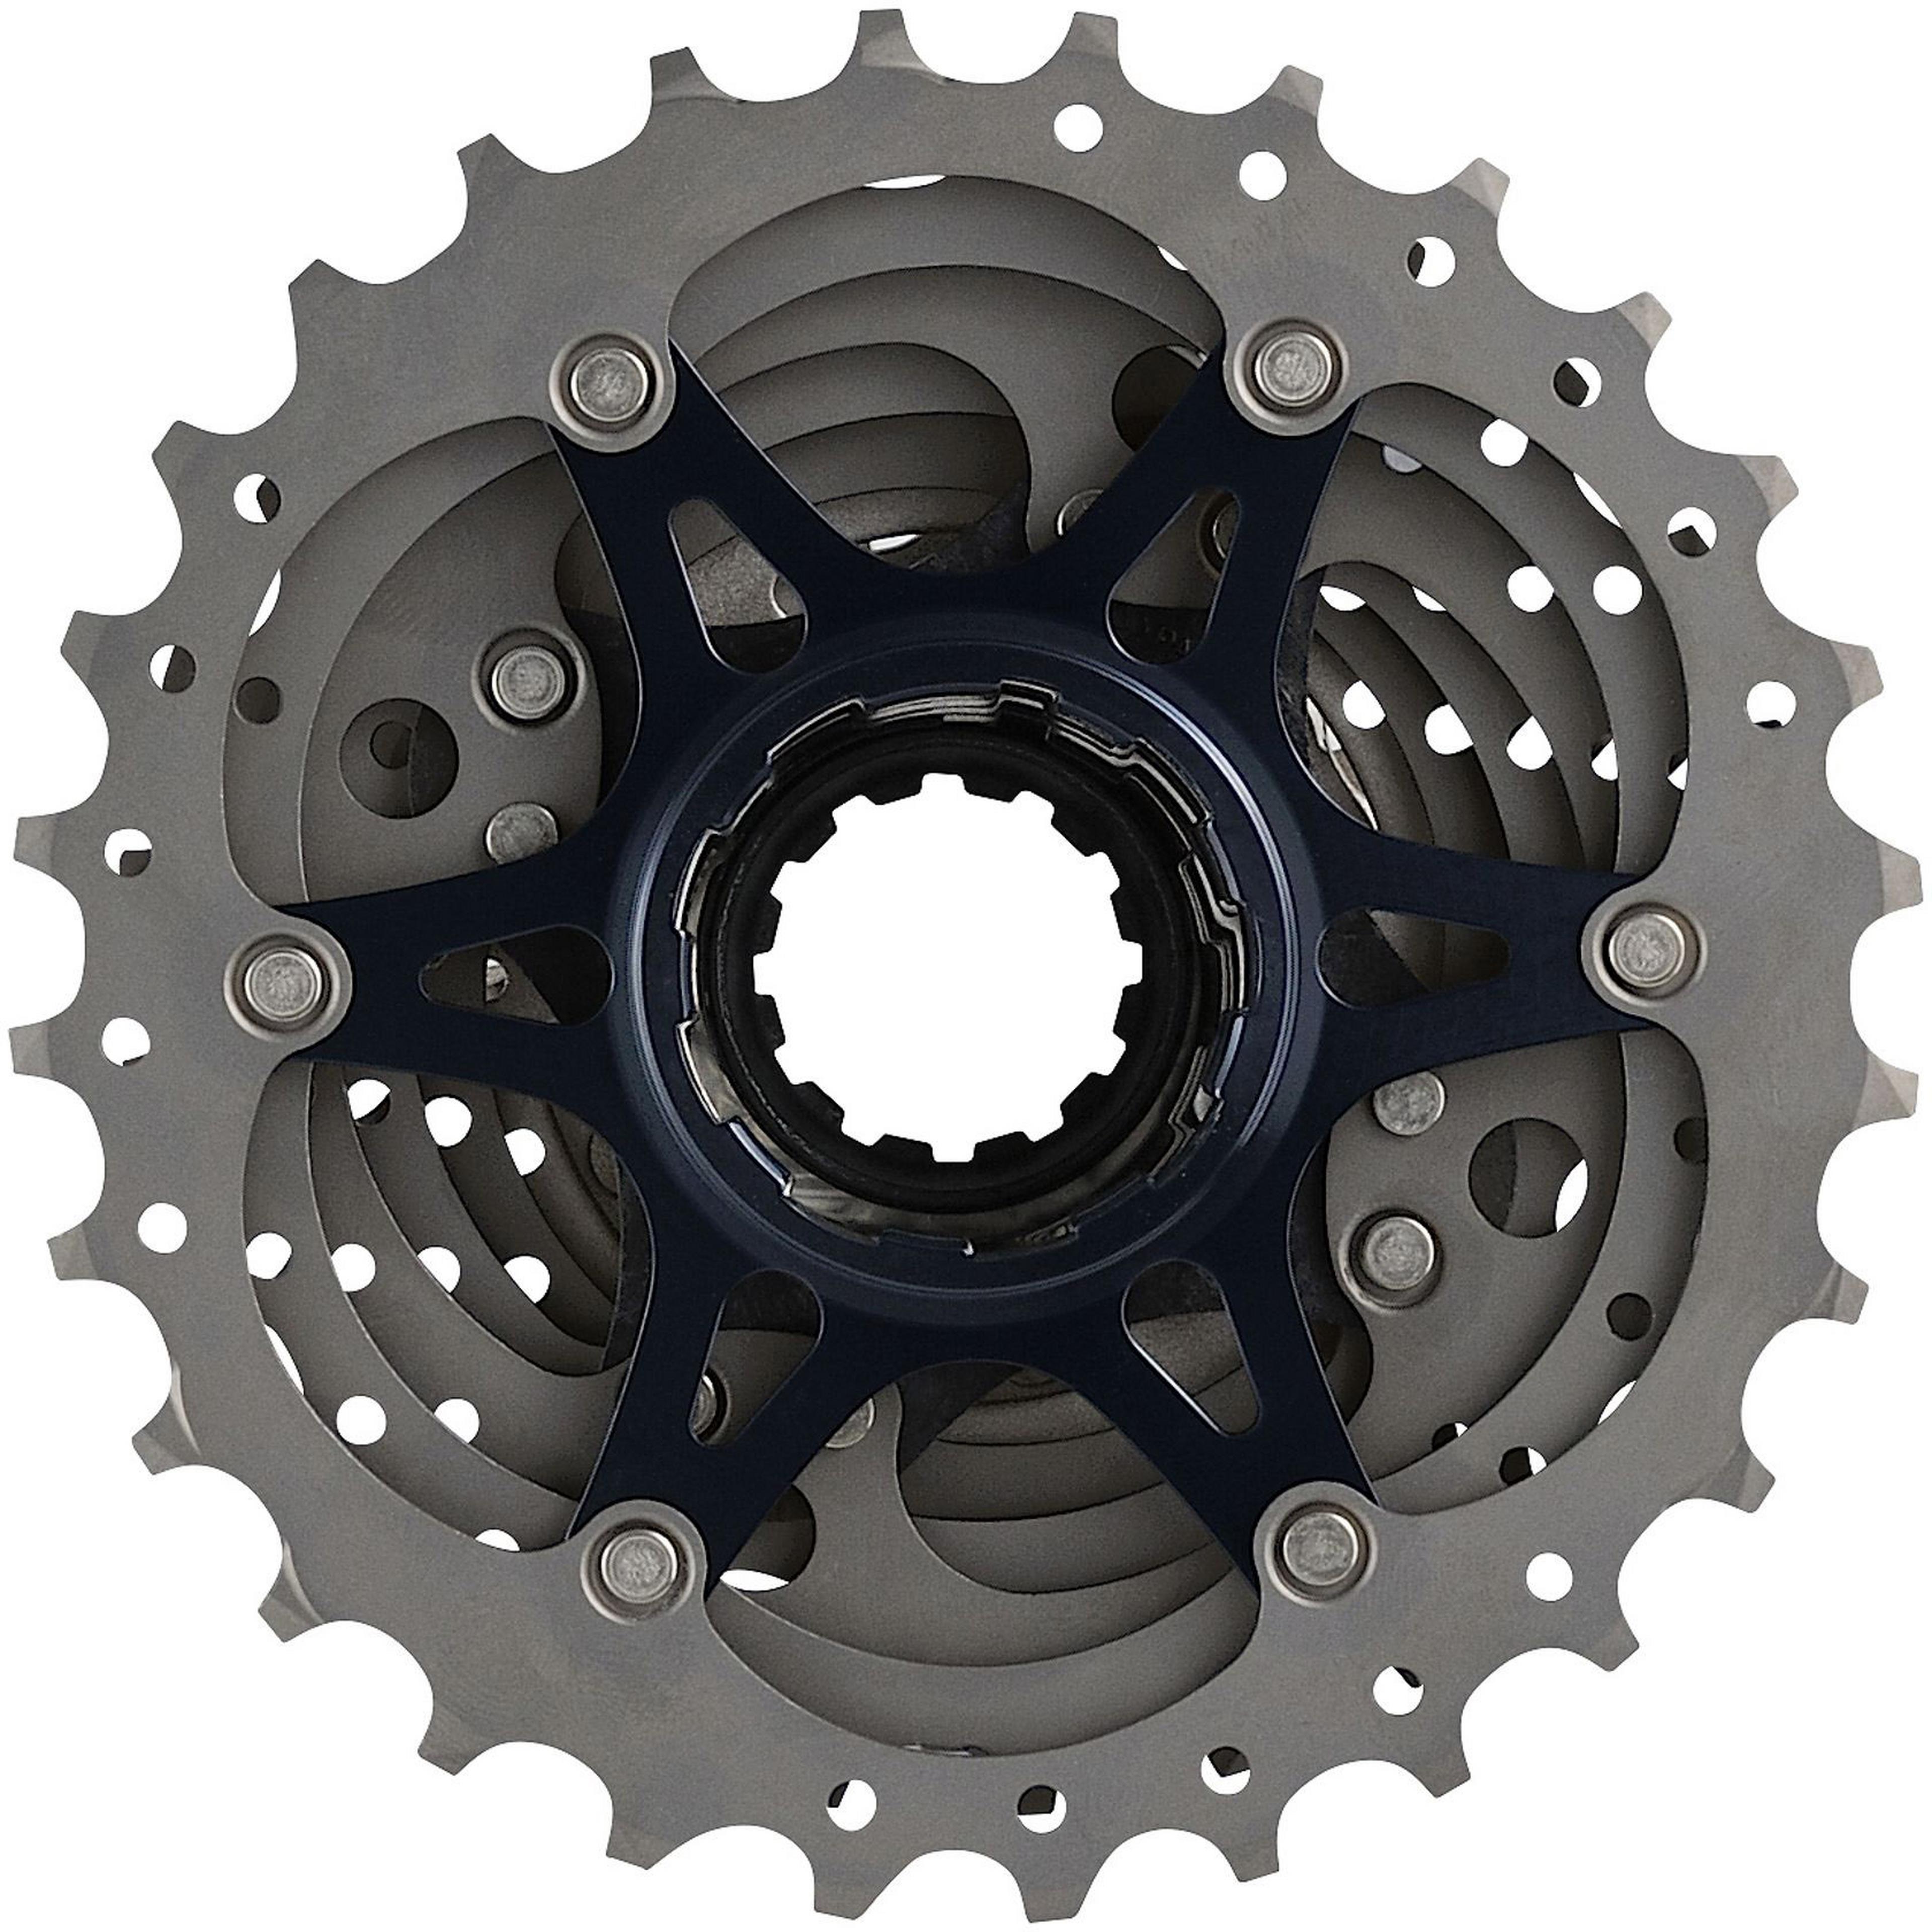 Cassette SHIMANO DURA ACE CS-9000 11v 11/23 (Ref 240) at the price of  85,00 €